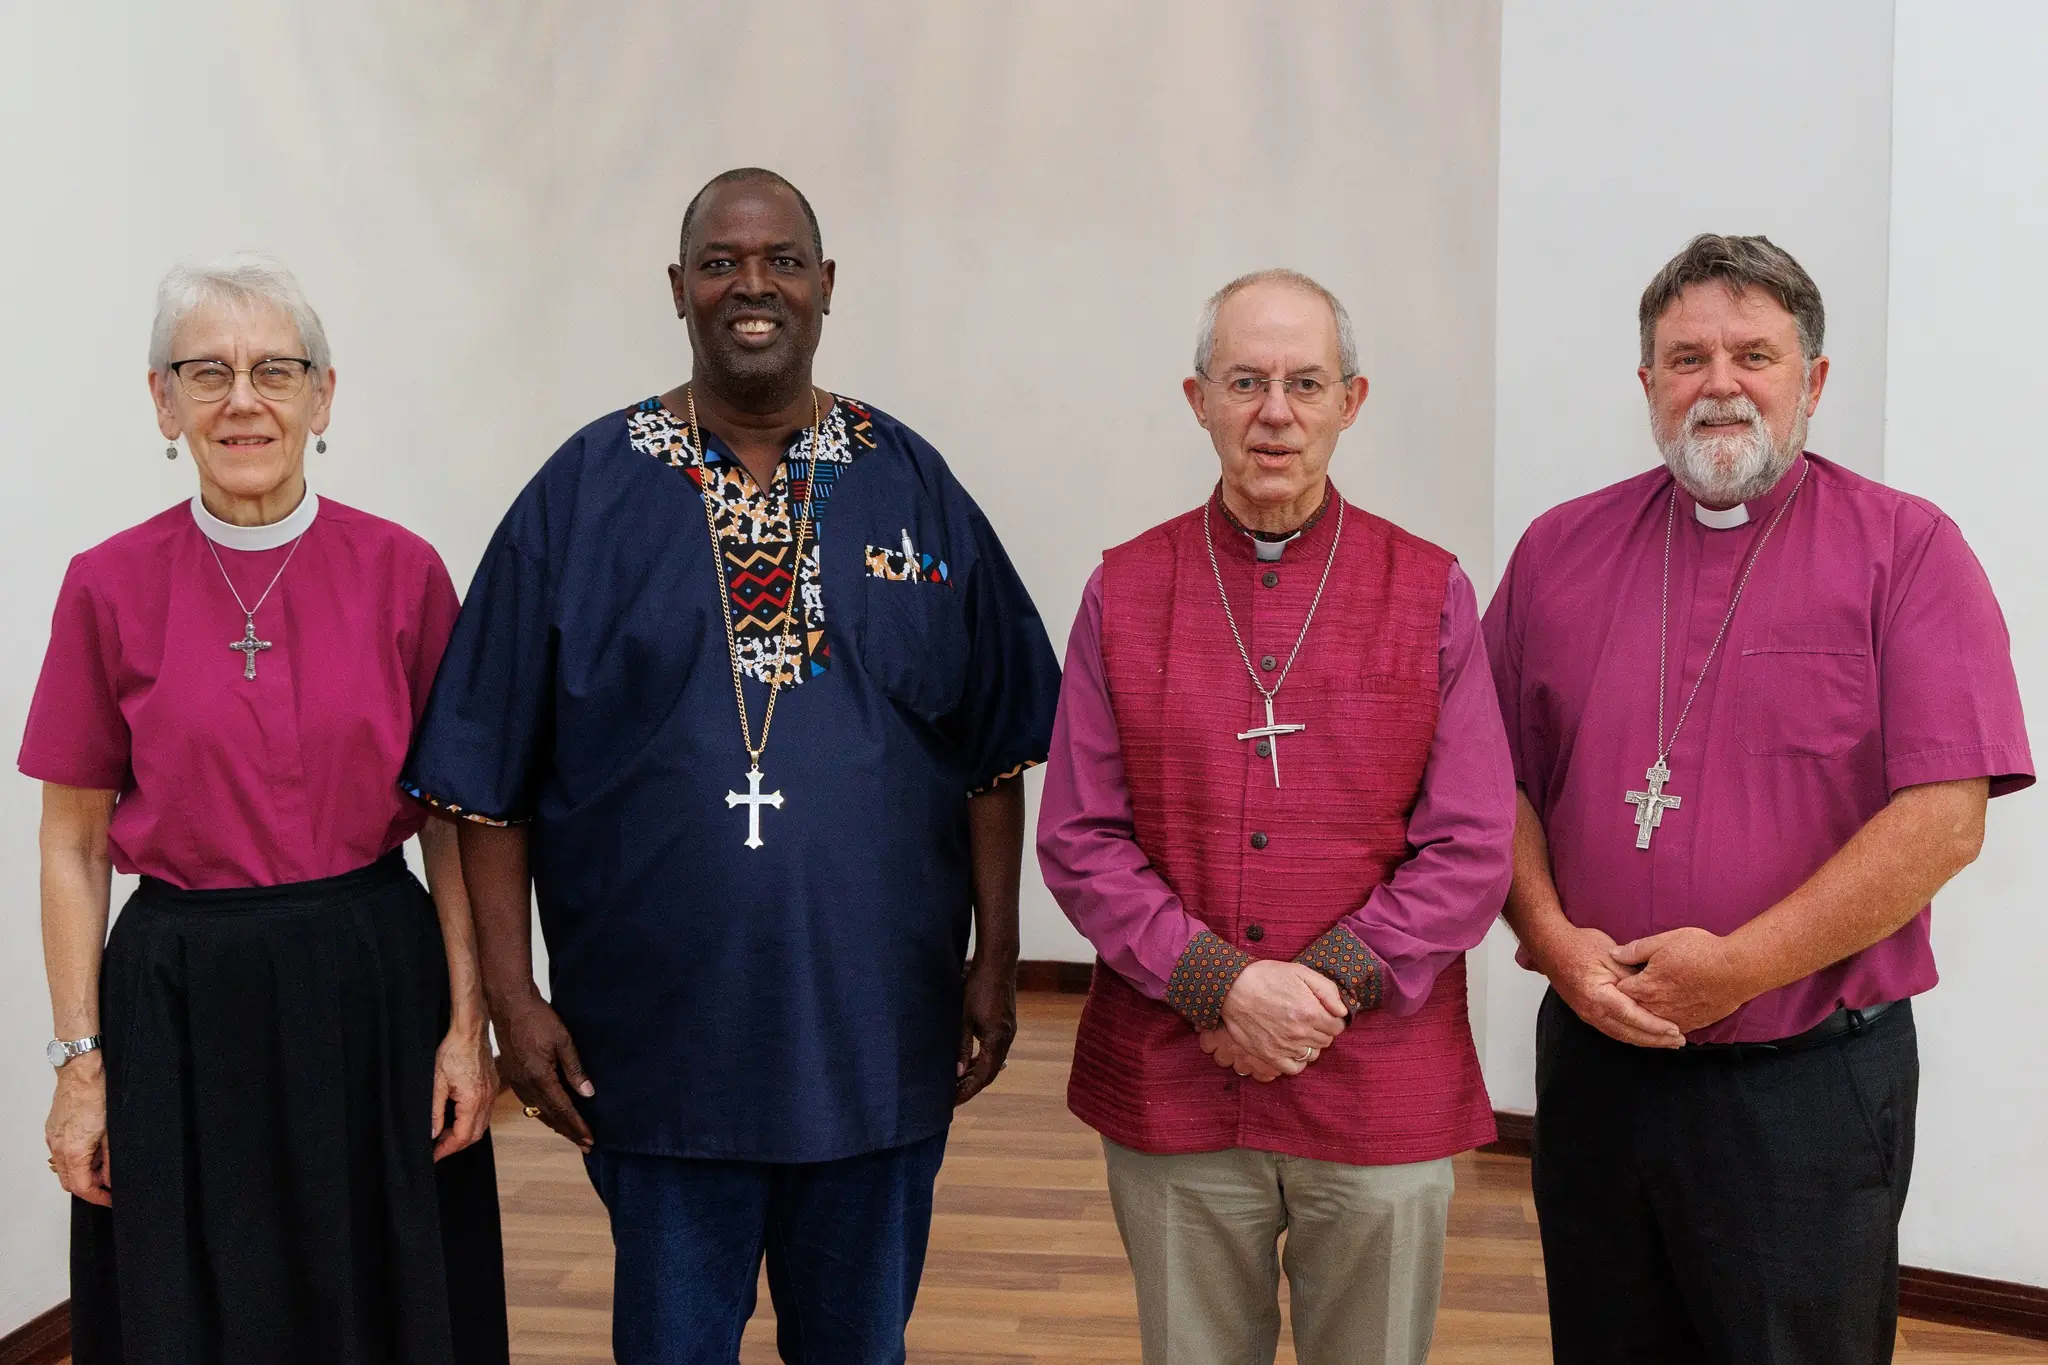 Justin Welby Archbishop of Canterbury and a group of Primates at the eighteenth Anglican Consultative Council at the Marriott Hotel Accra, Ghana